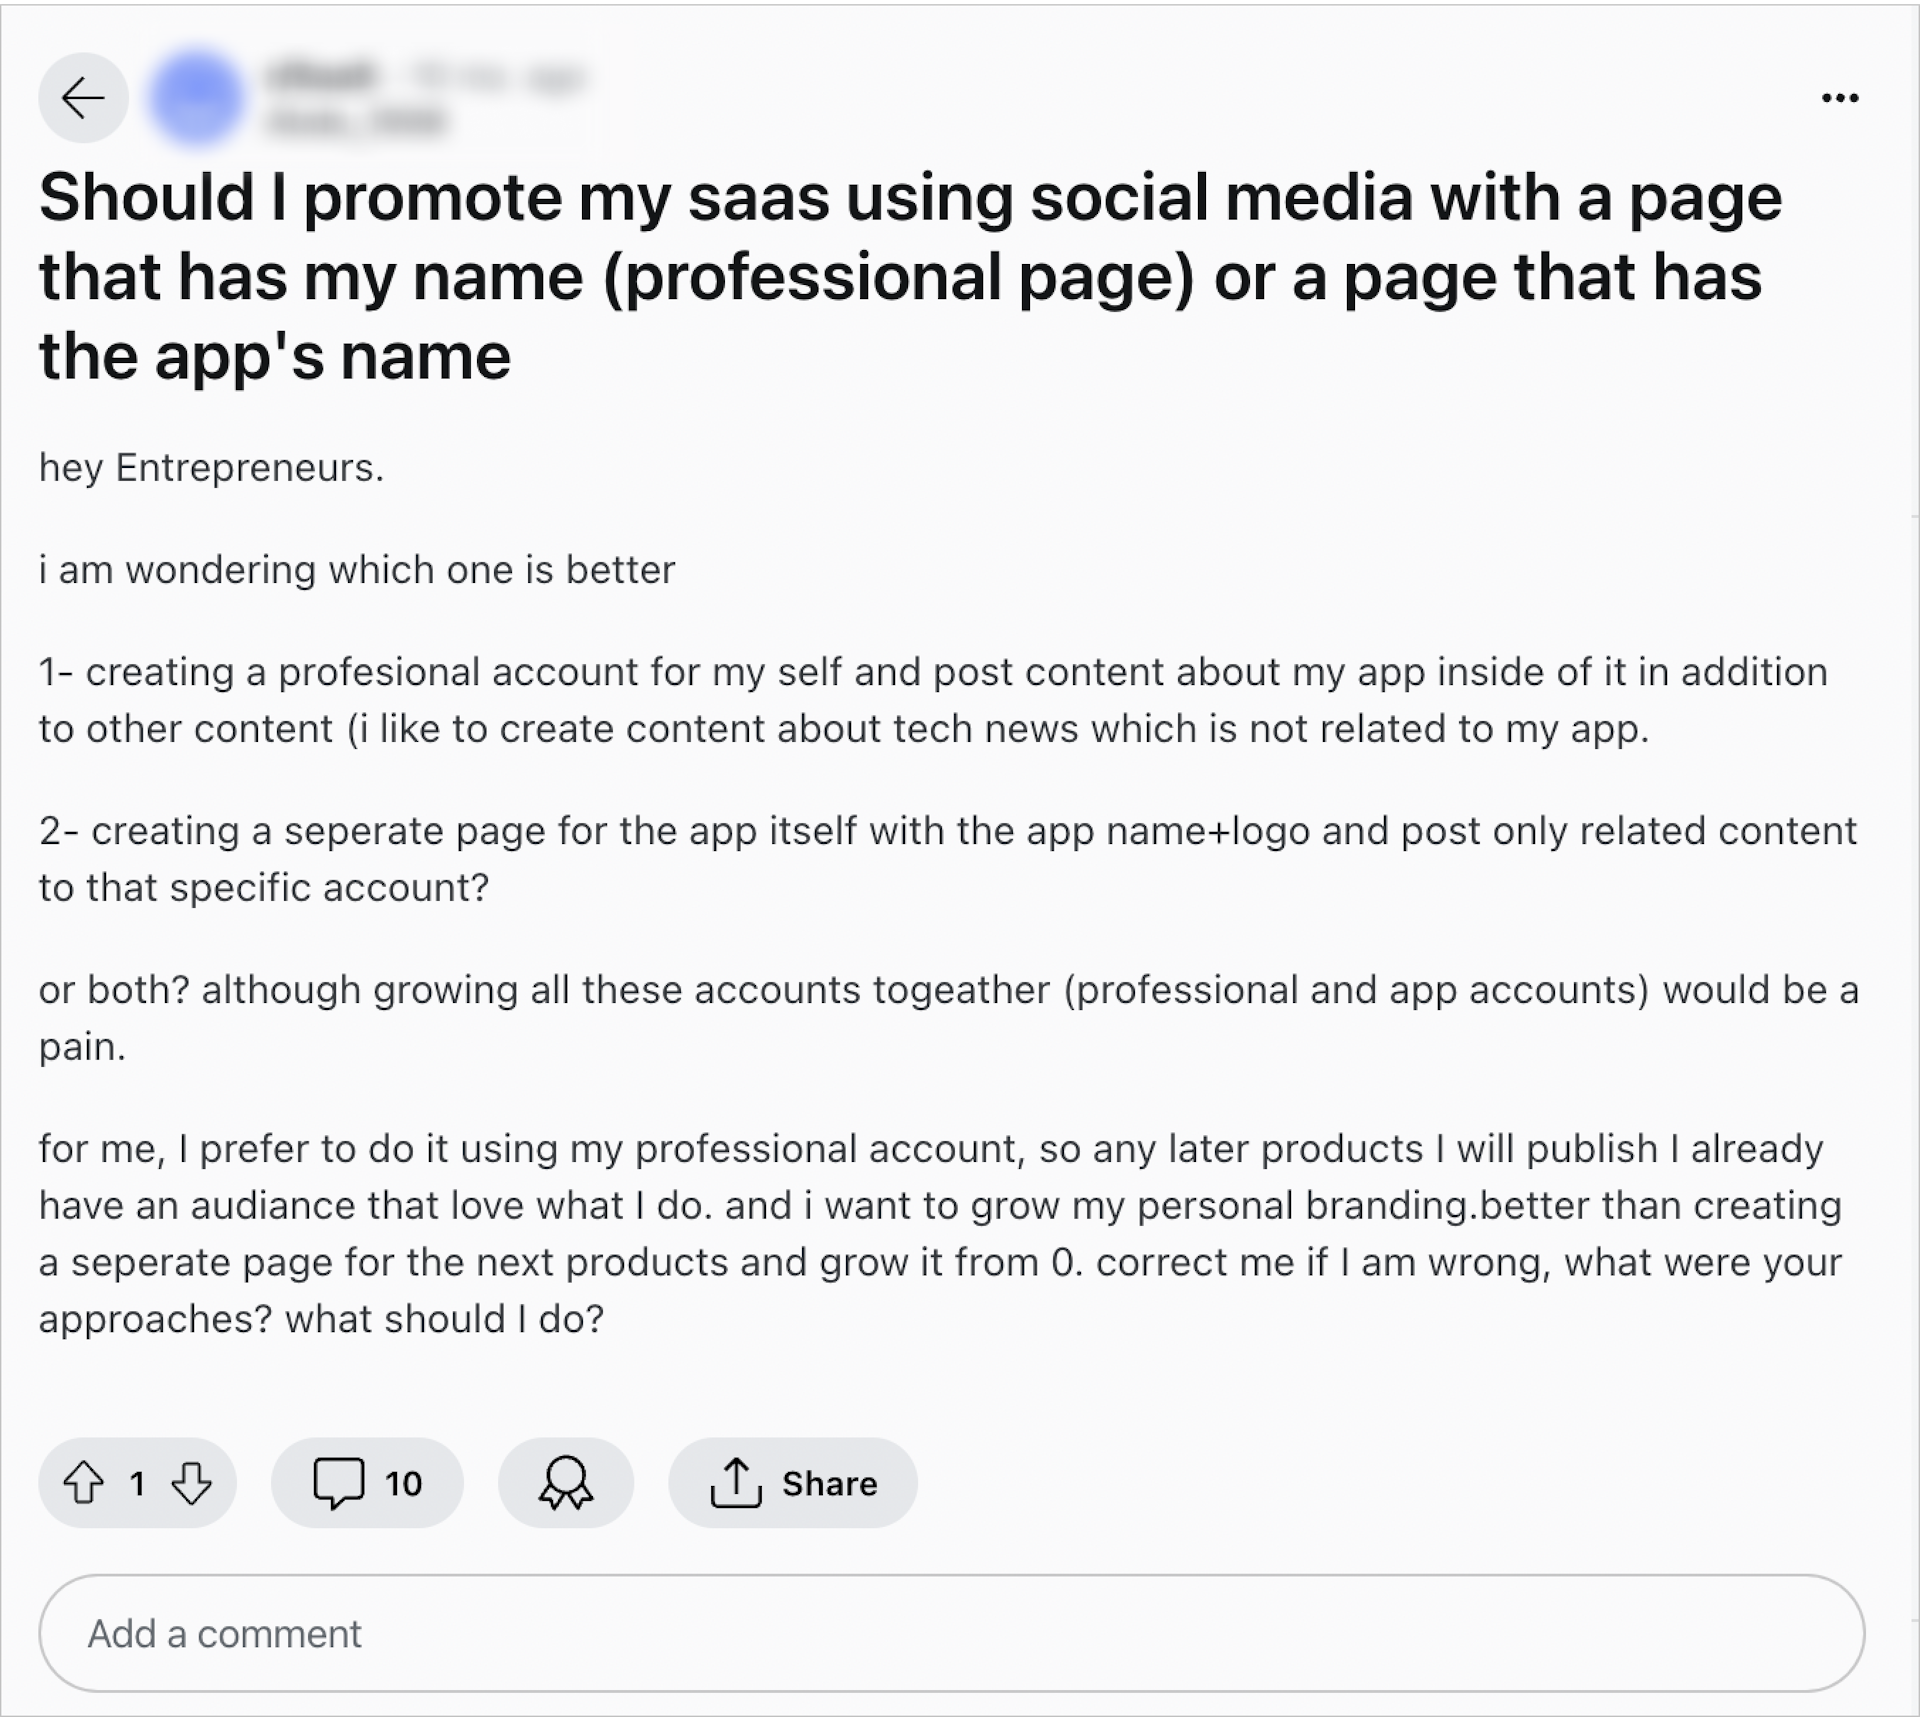 Should I promote my saas using social media with a page that has my name (professional page) or a page that has the app's name